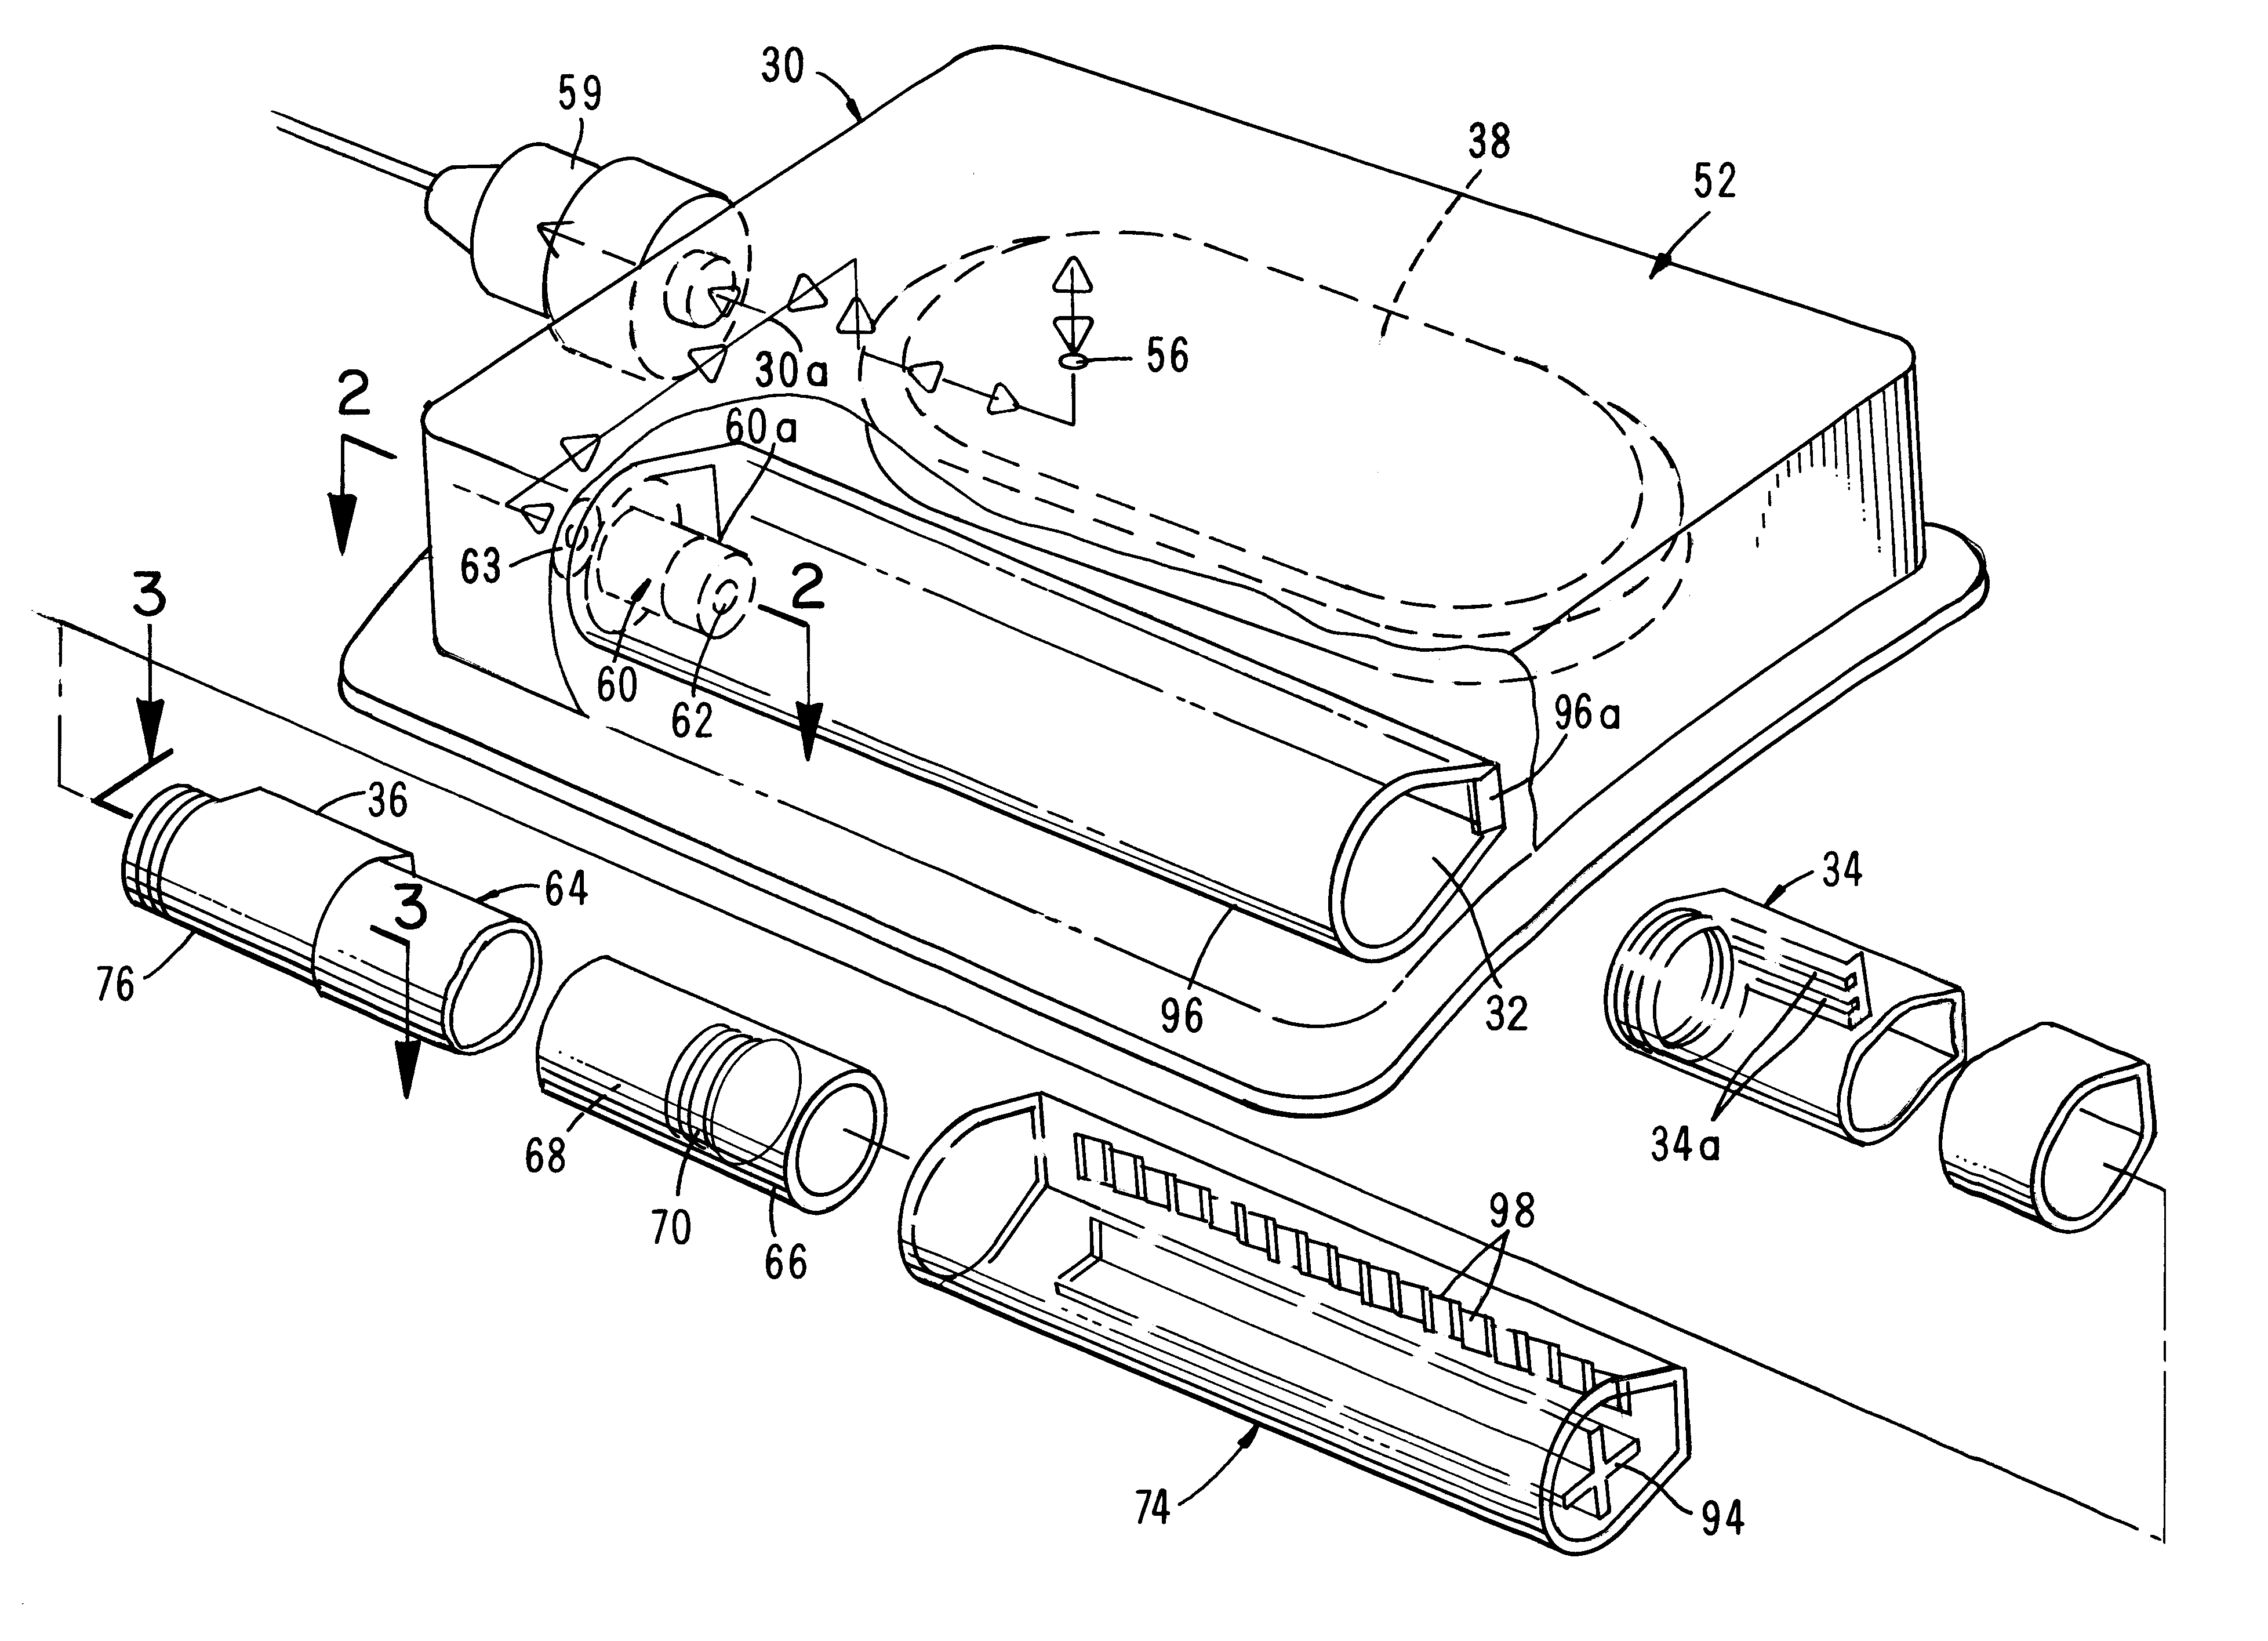 Fluid delivery device with full adapter